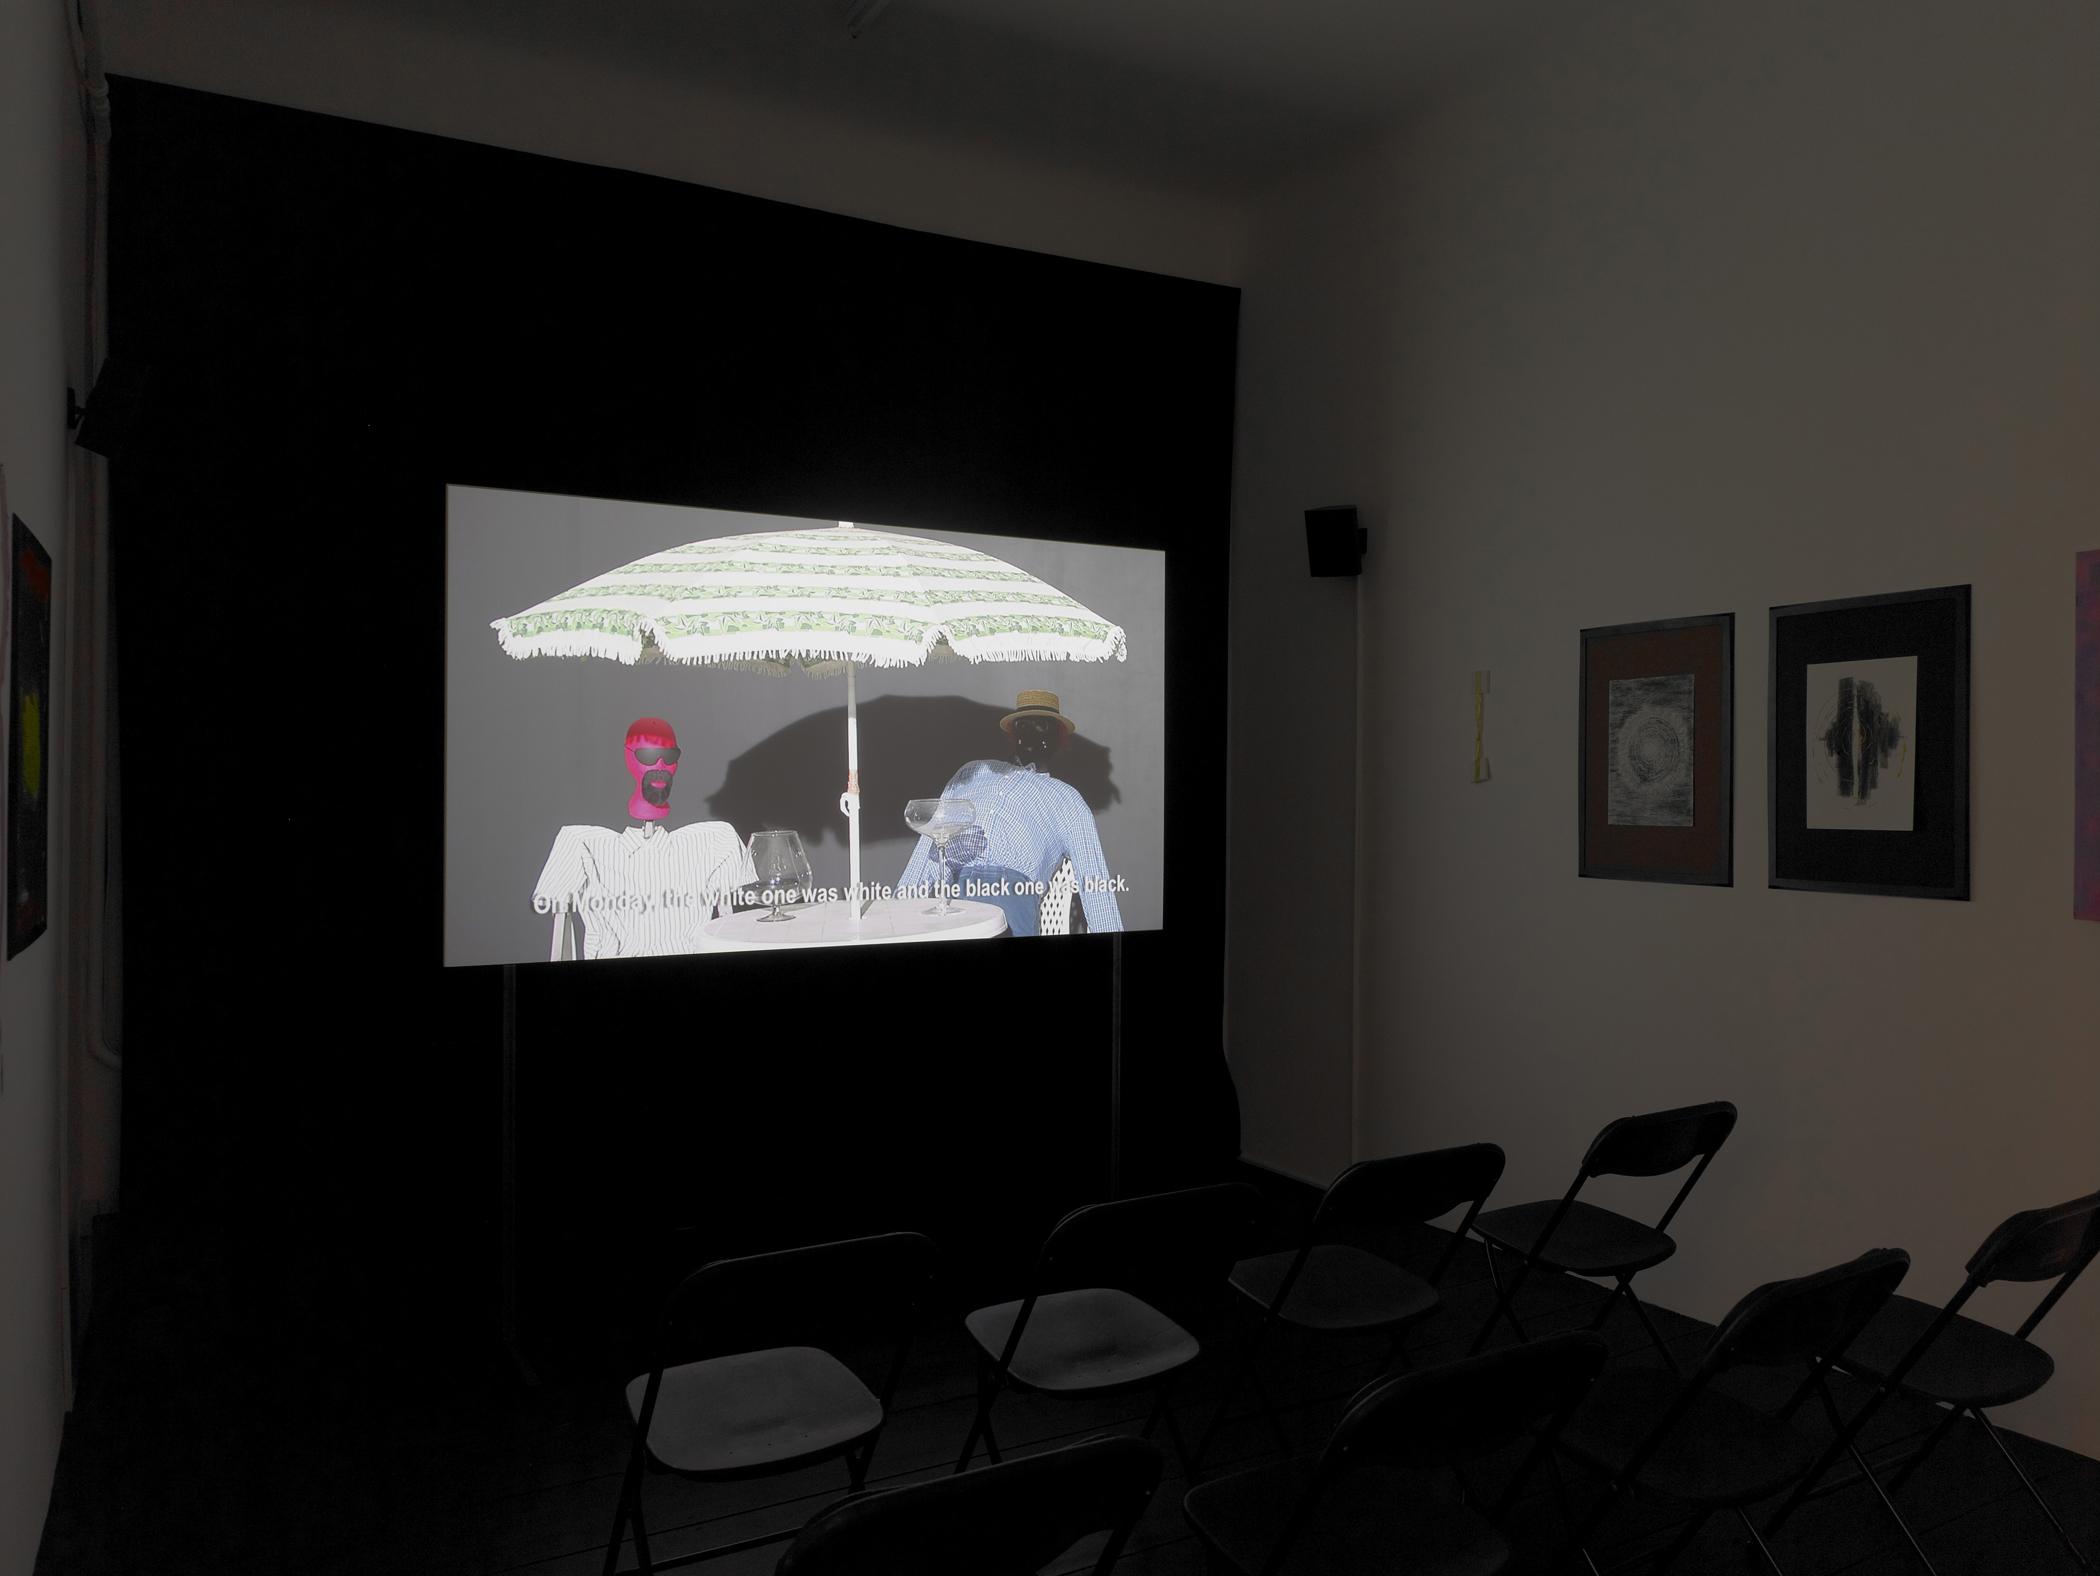 Installation view of a video projection of two humanoid dolls sitting at a table shaded by a striped umbrella